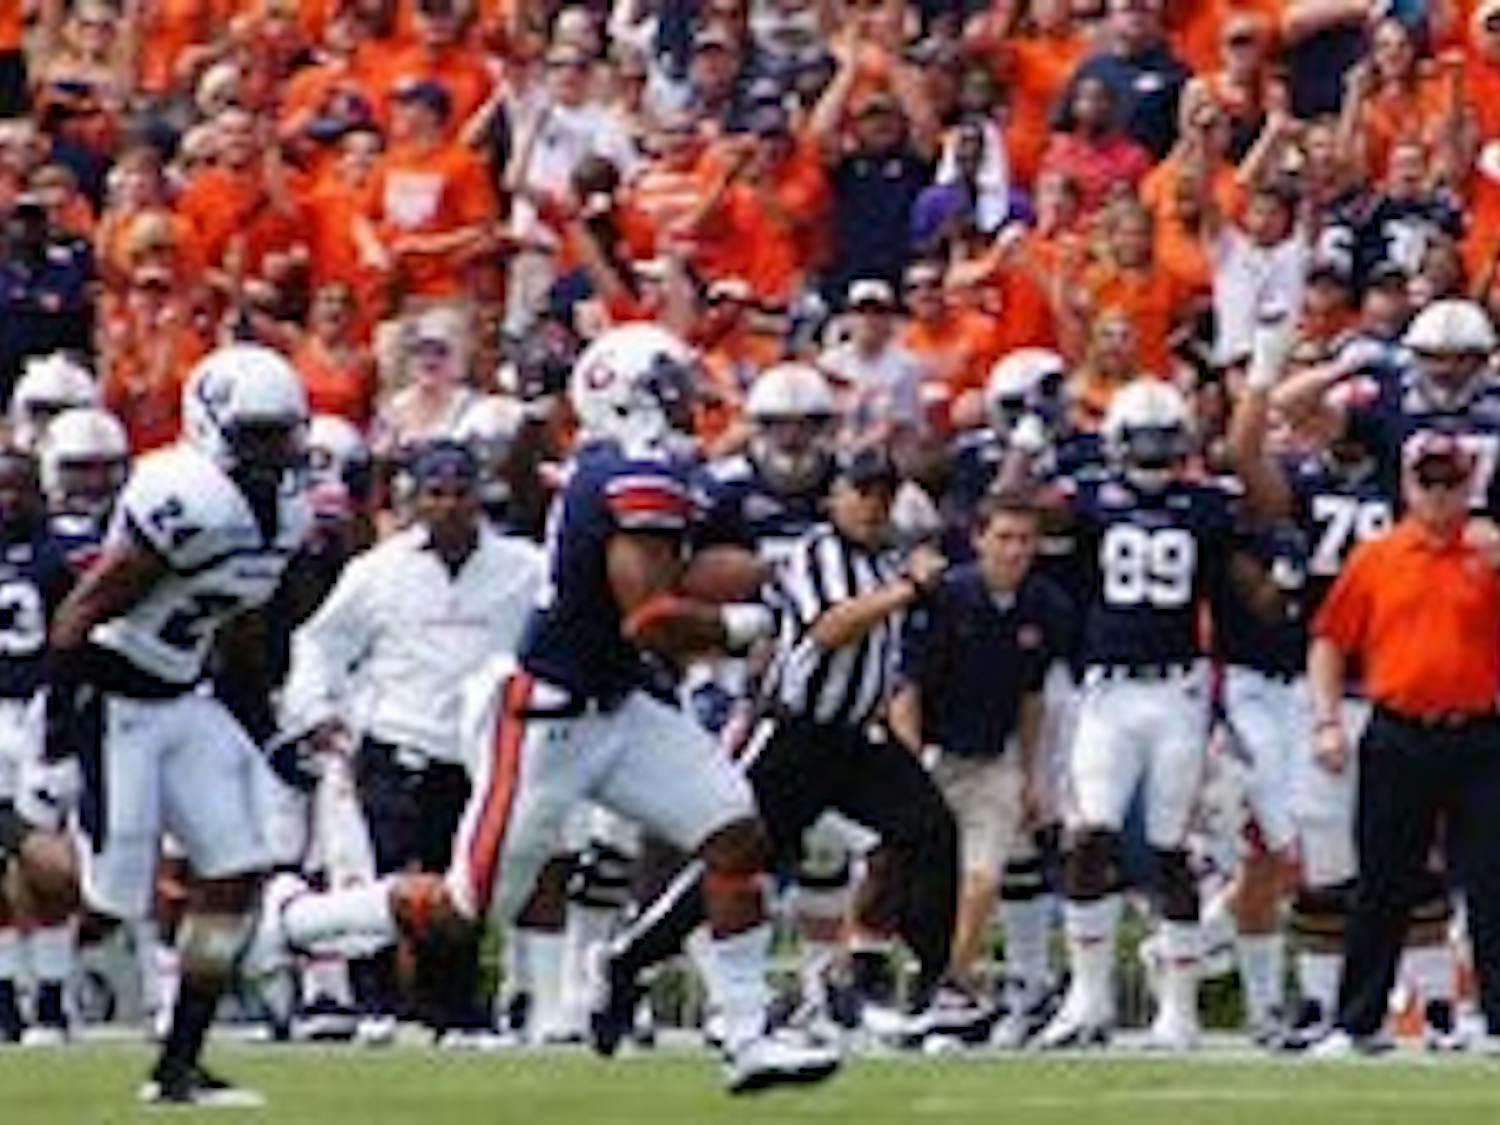 Auburn fans cheer as freshman running back Tre Mason sprints past Utah State defenders for a 97-yard kickoff return for a touchdown in the second quarter Saturday. (Robert E. Lee / ASSISTANT CAMPUS EDITOR)